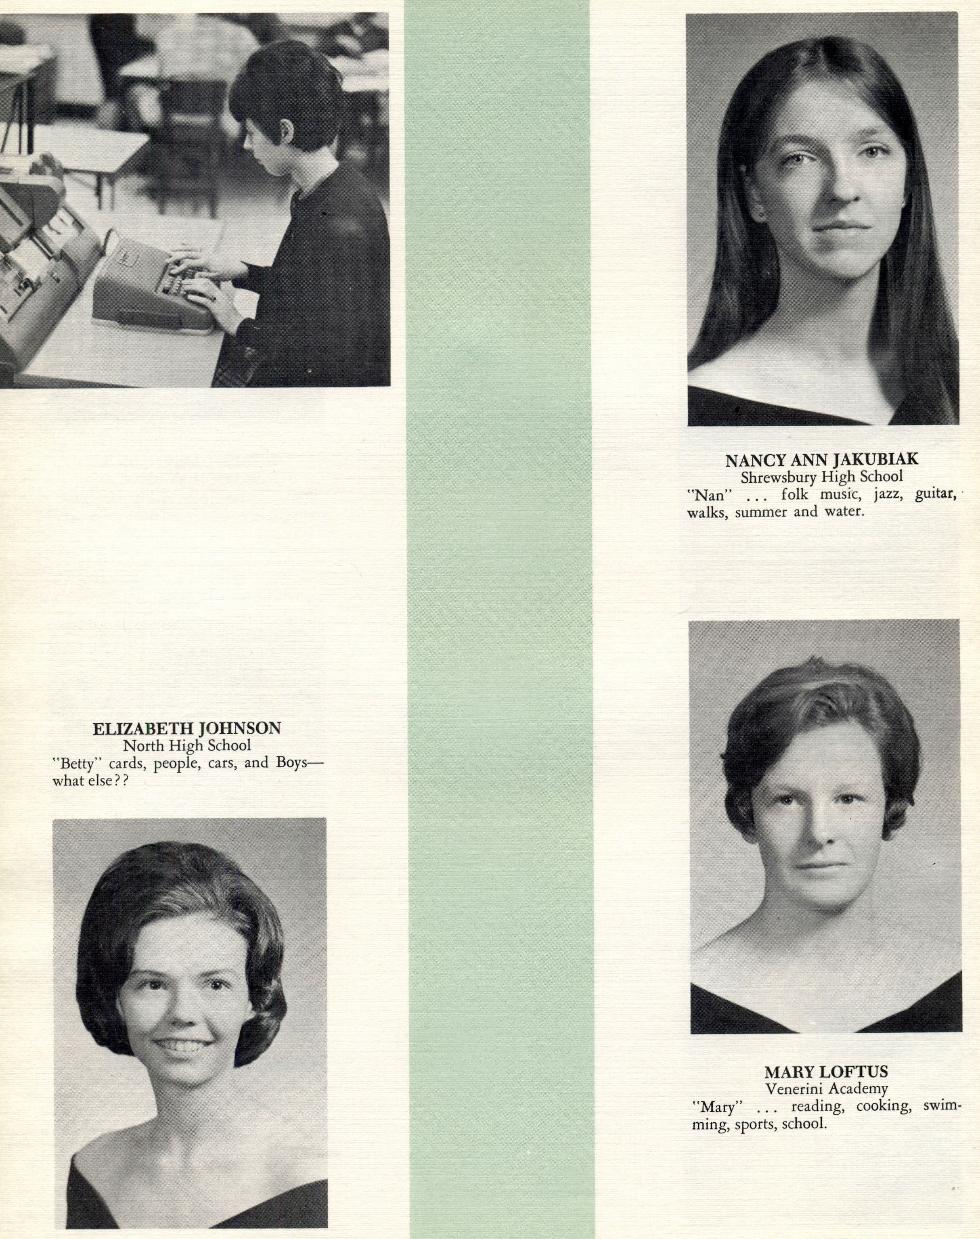 Worcester Industrial Technical Institute Class of 1968 Yearbook Data Processing